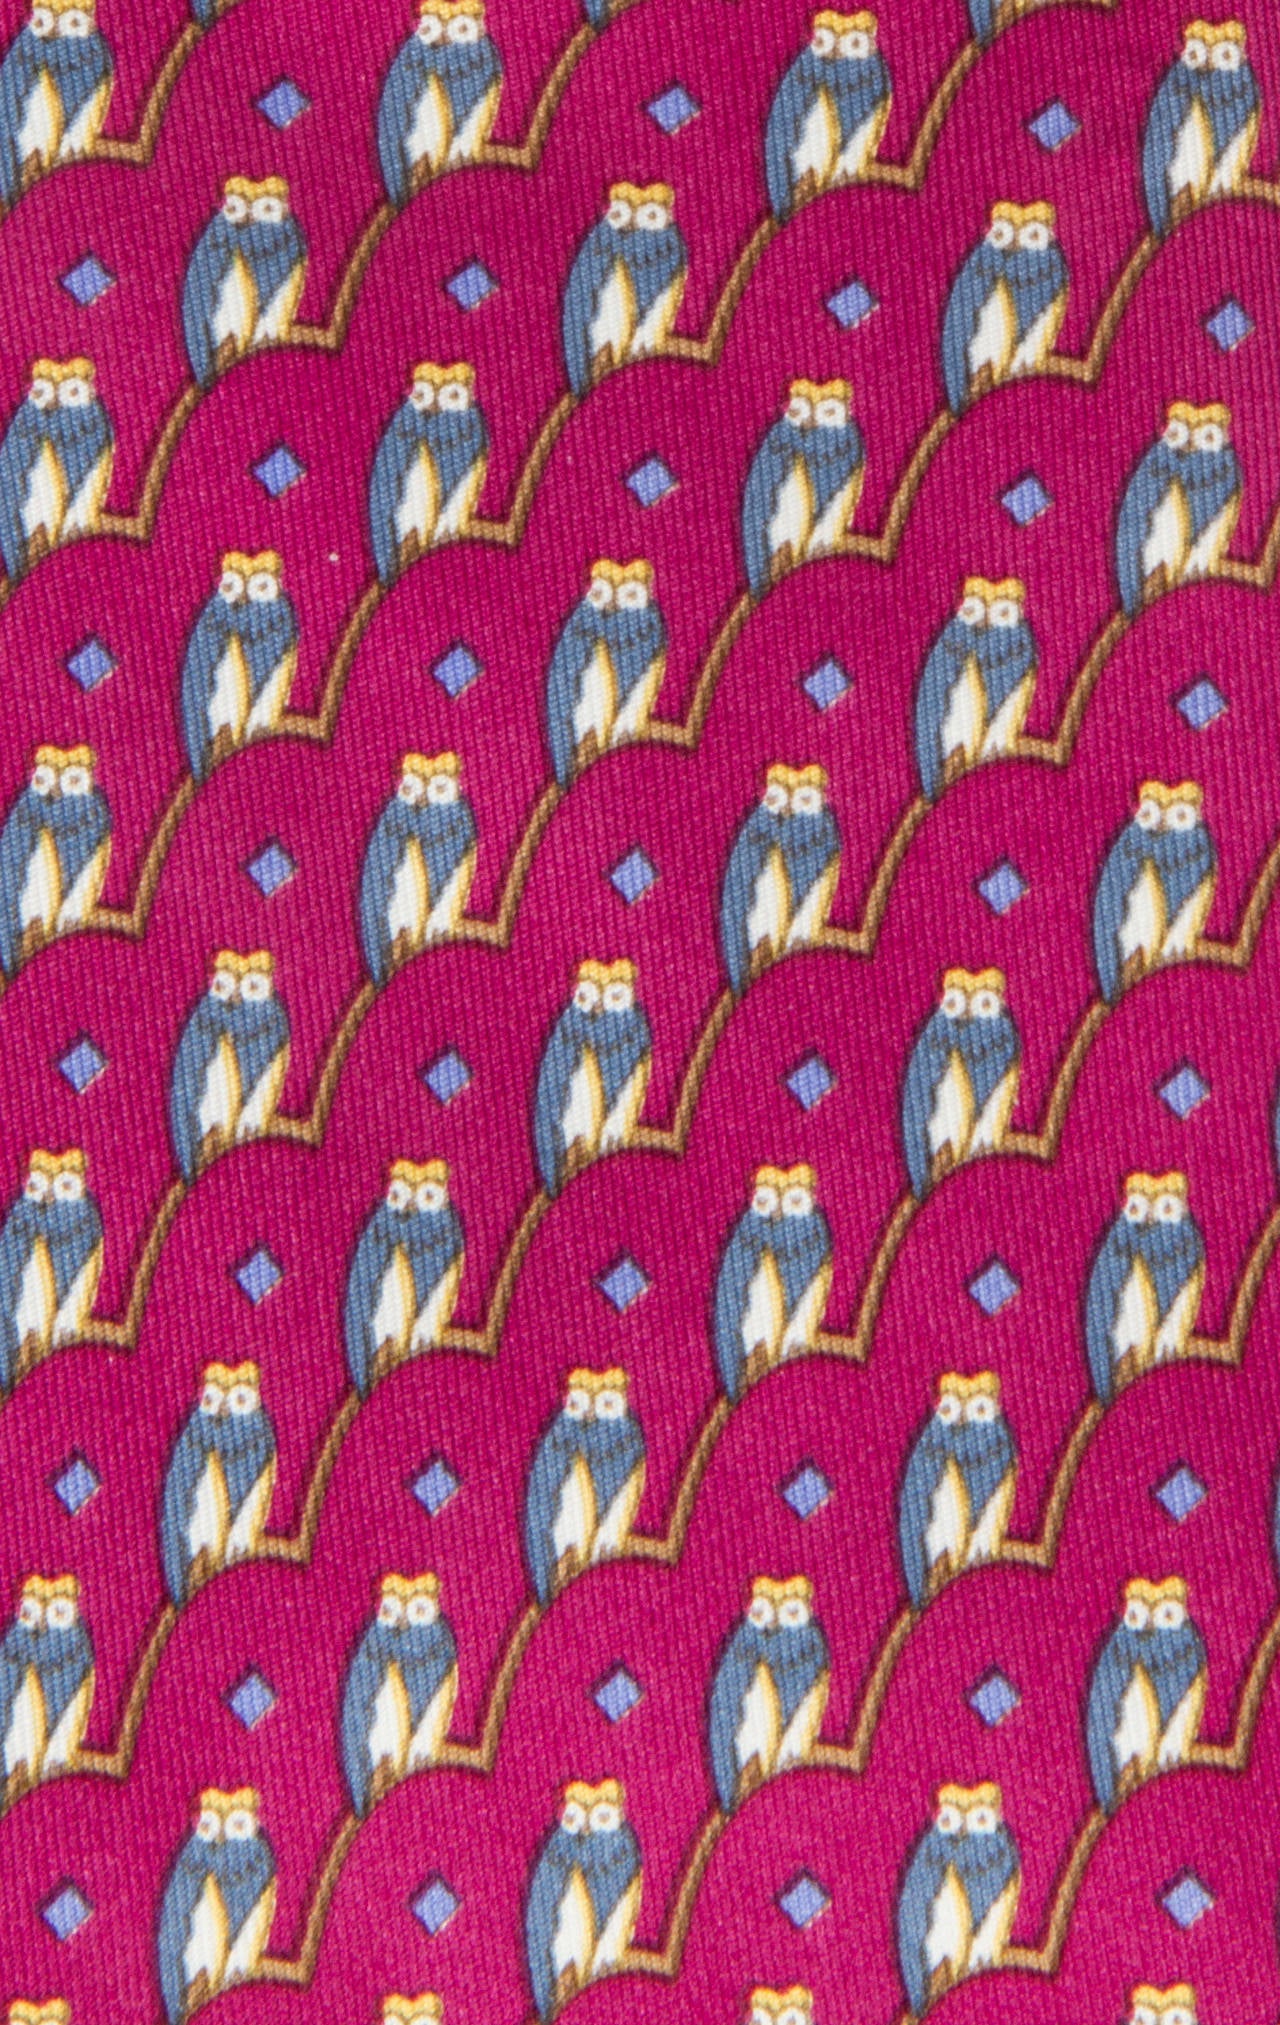 This s a wonderful tie in a great color with a repeat pattern of Owls